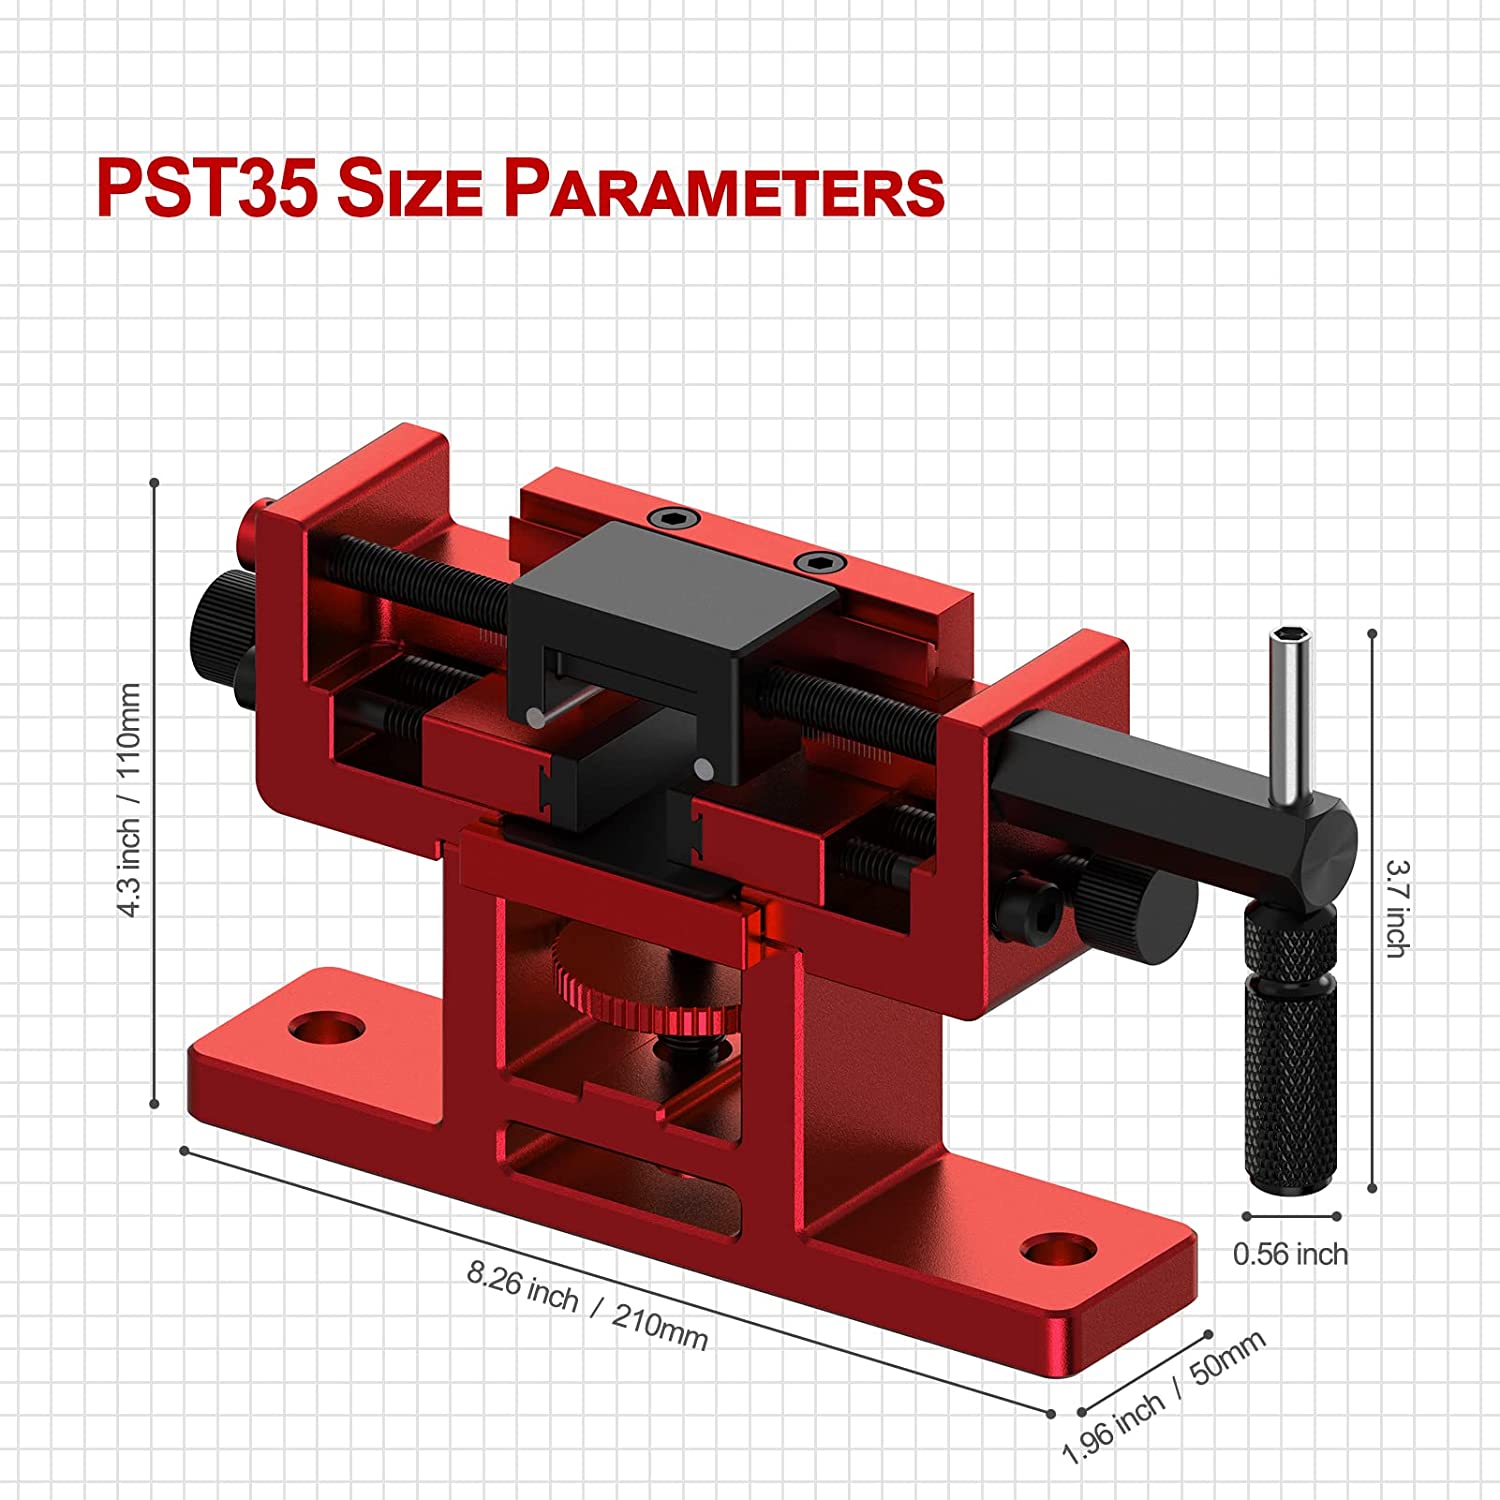 hawkway PST35 Pistol Iron Sight Installation & Disassembly Tool, Front Sight Tool for Glock